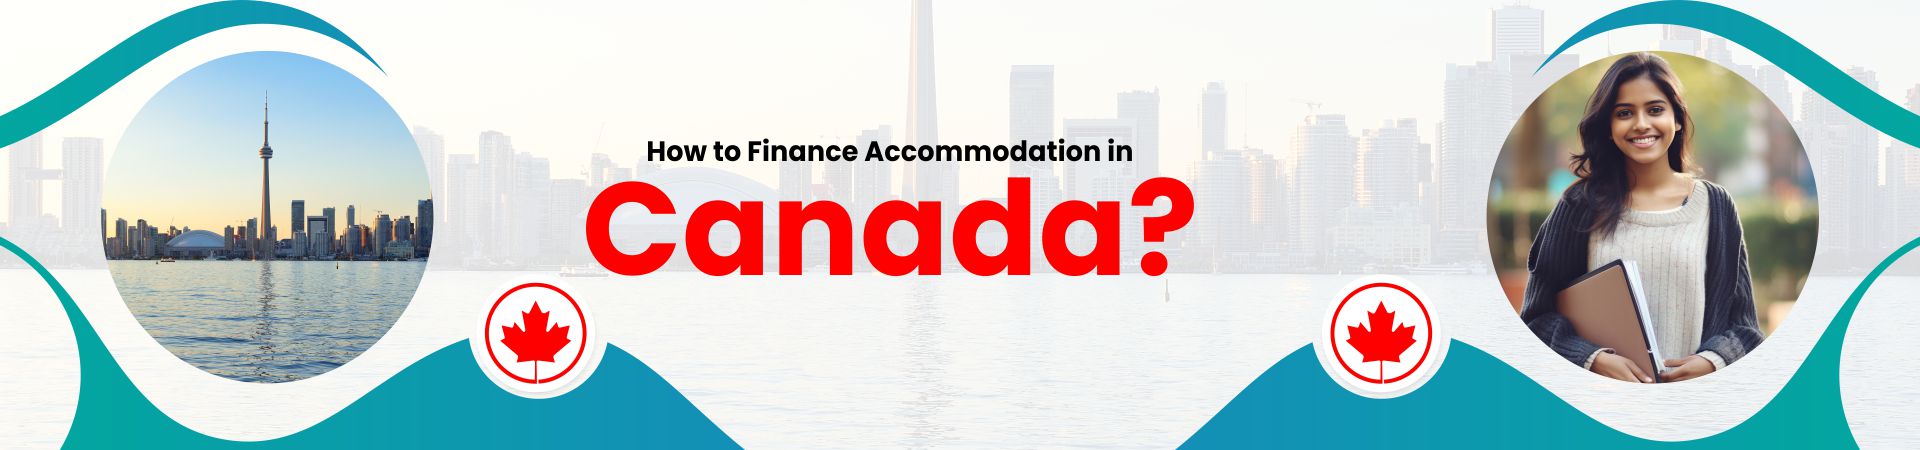 How to Finance Accommodation in Canada?